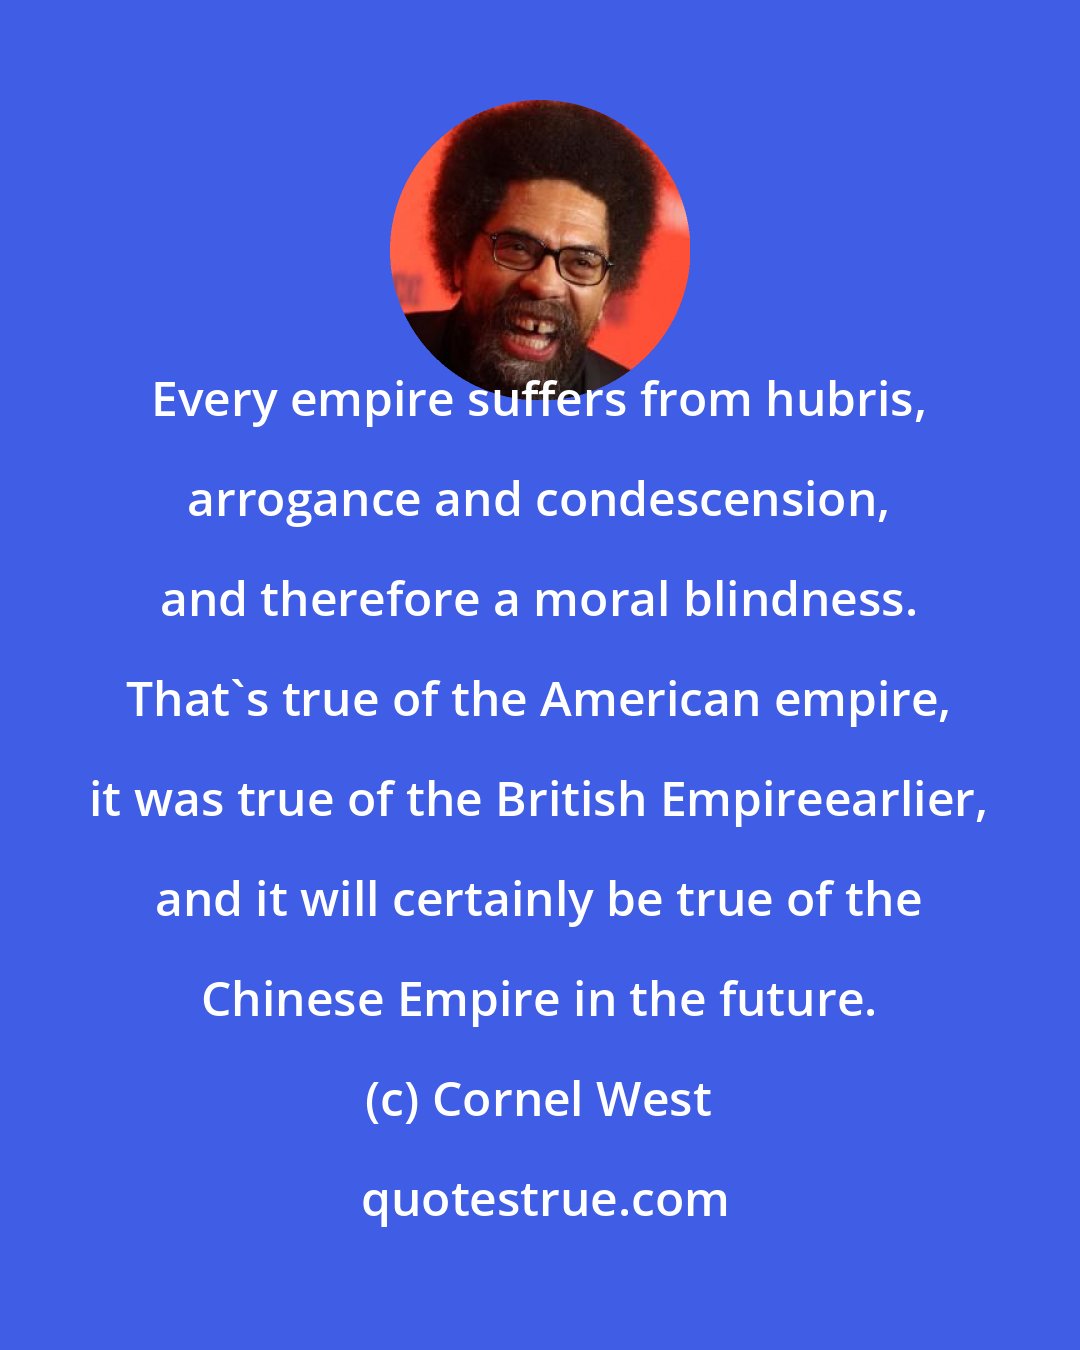 Cornel West: Every empire suffers from hubris, arrogance and condescension, and therefore a moral blindness. That's true of the American empire, it was true of the British Empireearlier, and it will certainly be true of the Chinese Empire in the future.